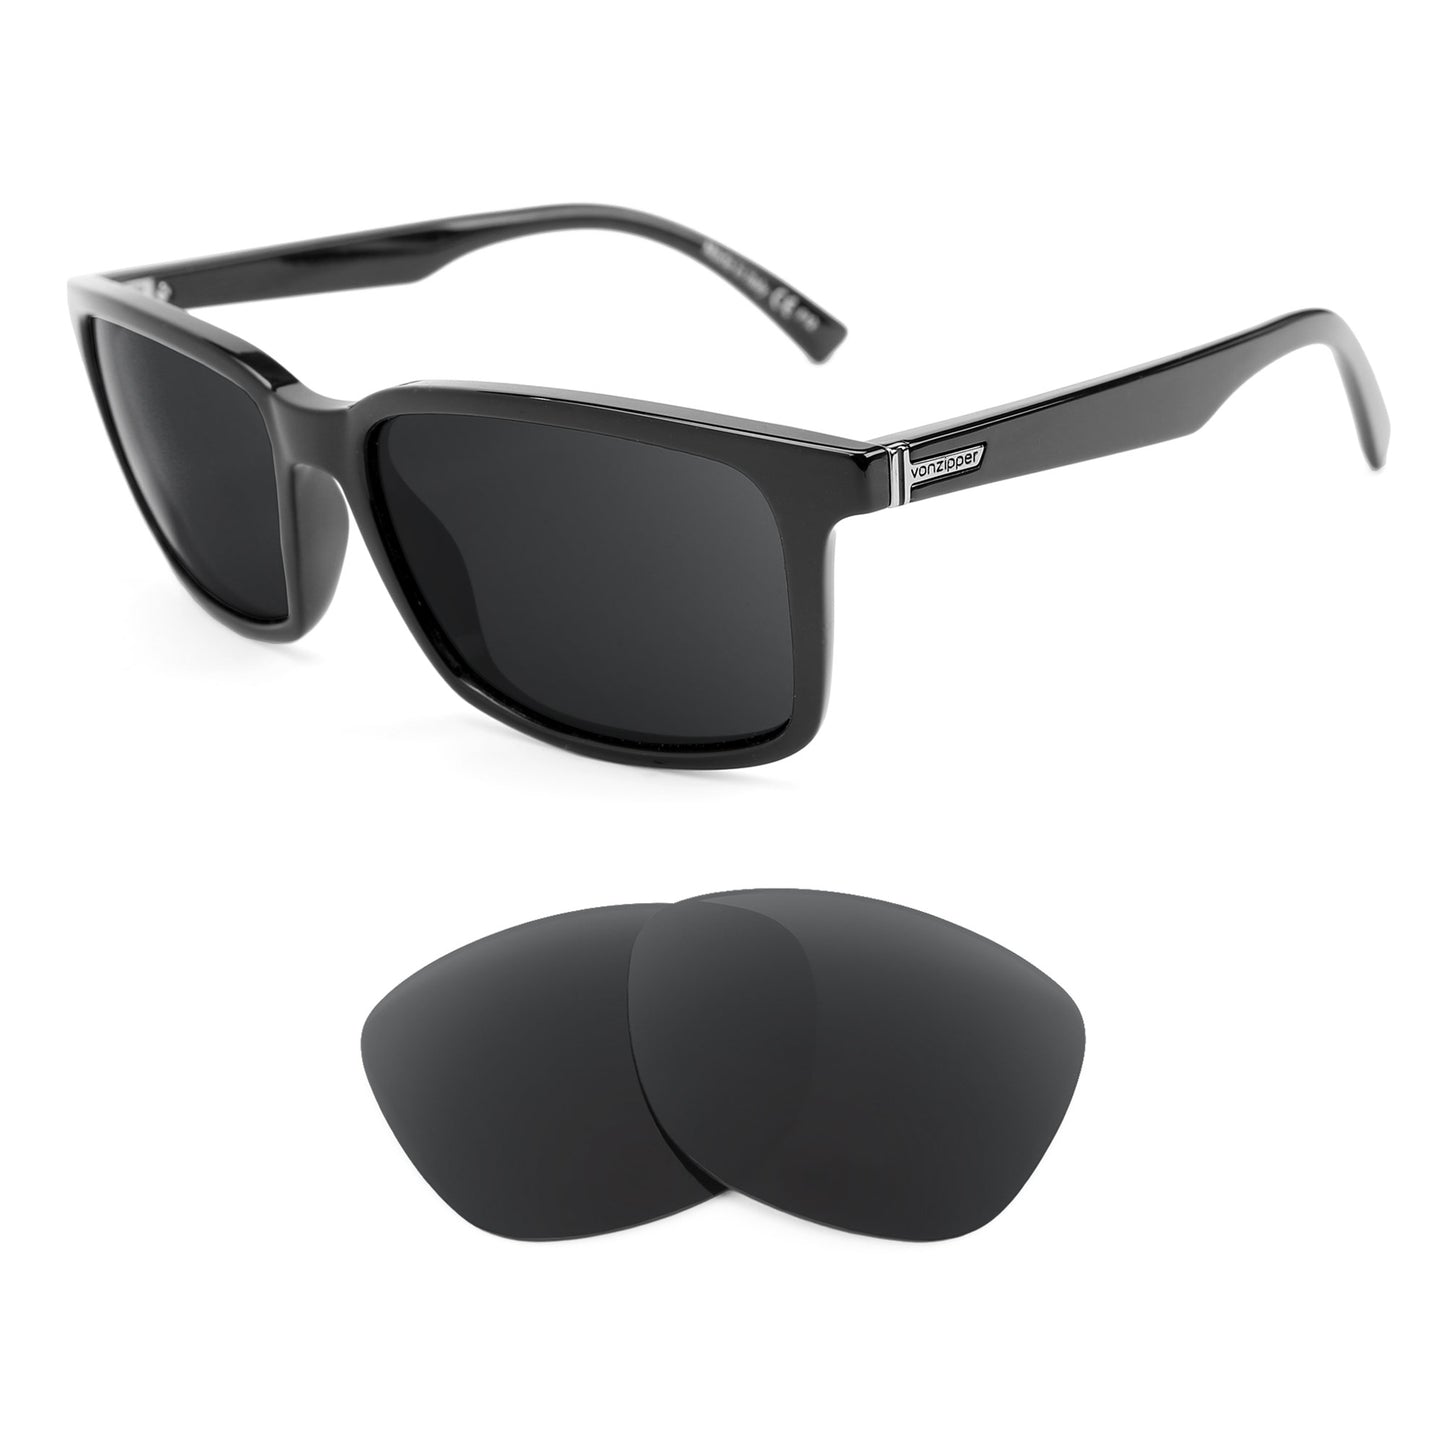 VonZipper Pinch sunglasses with replacement lenses